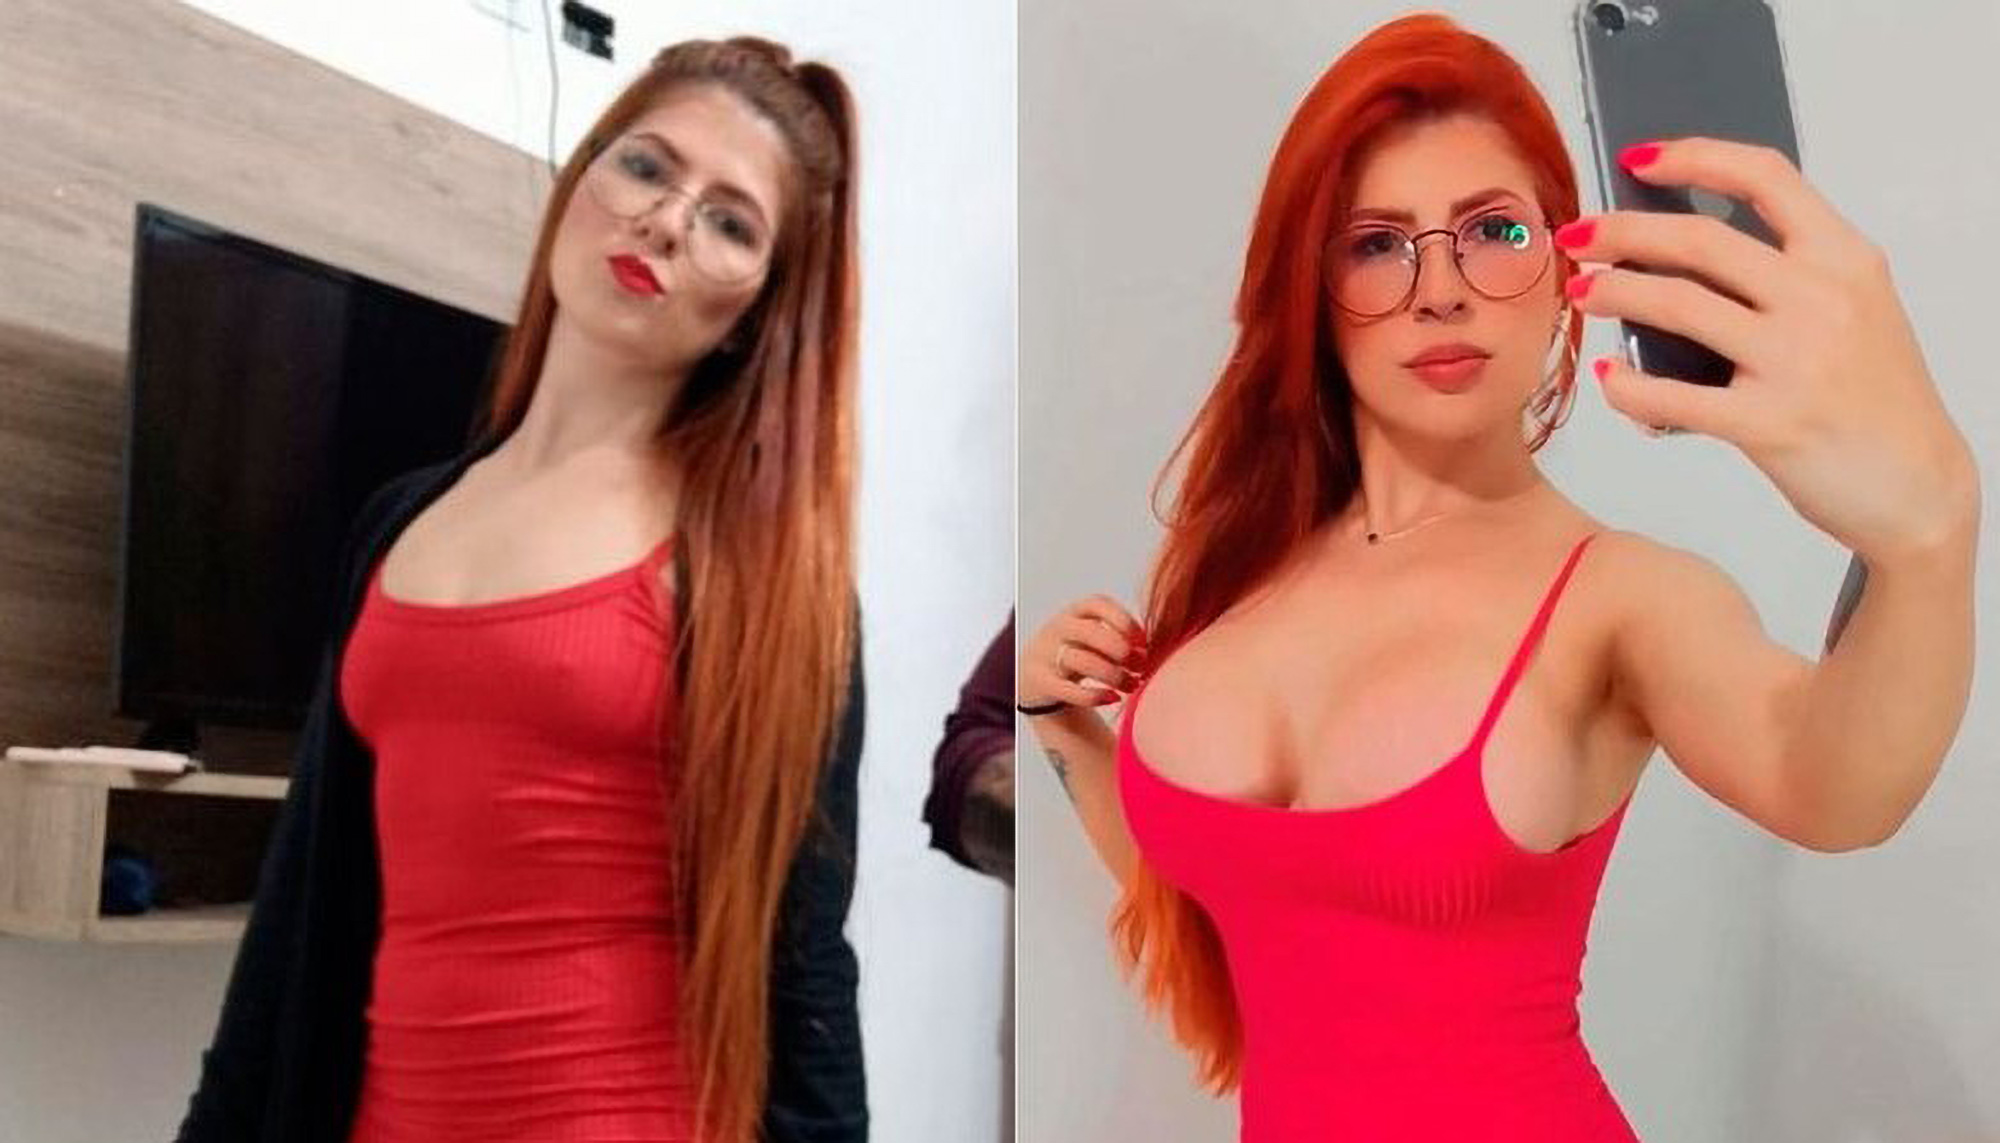 Read more about the article Model Stunned After D-Cup Boob Job Turbo Boosted Her Social Media Profile To Influencer Status